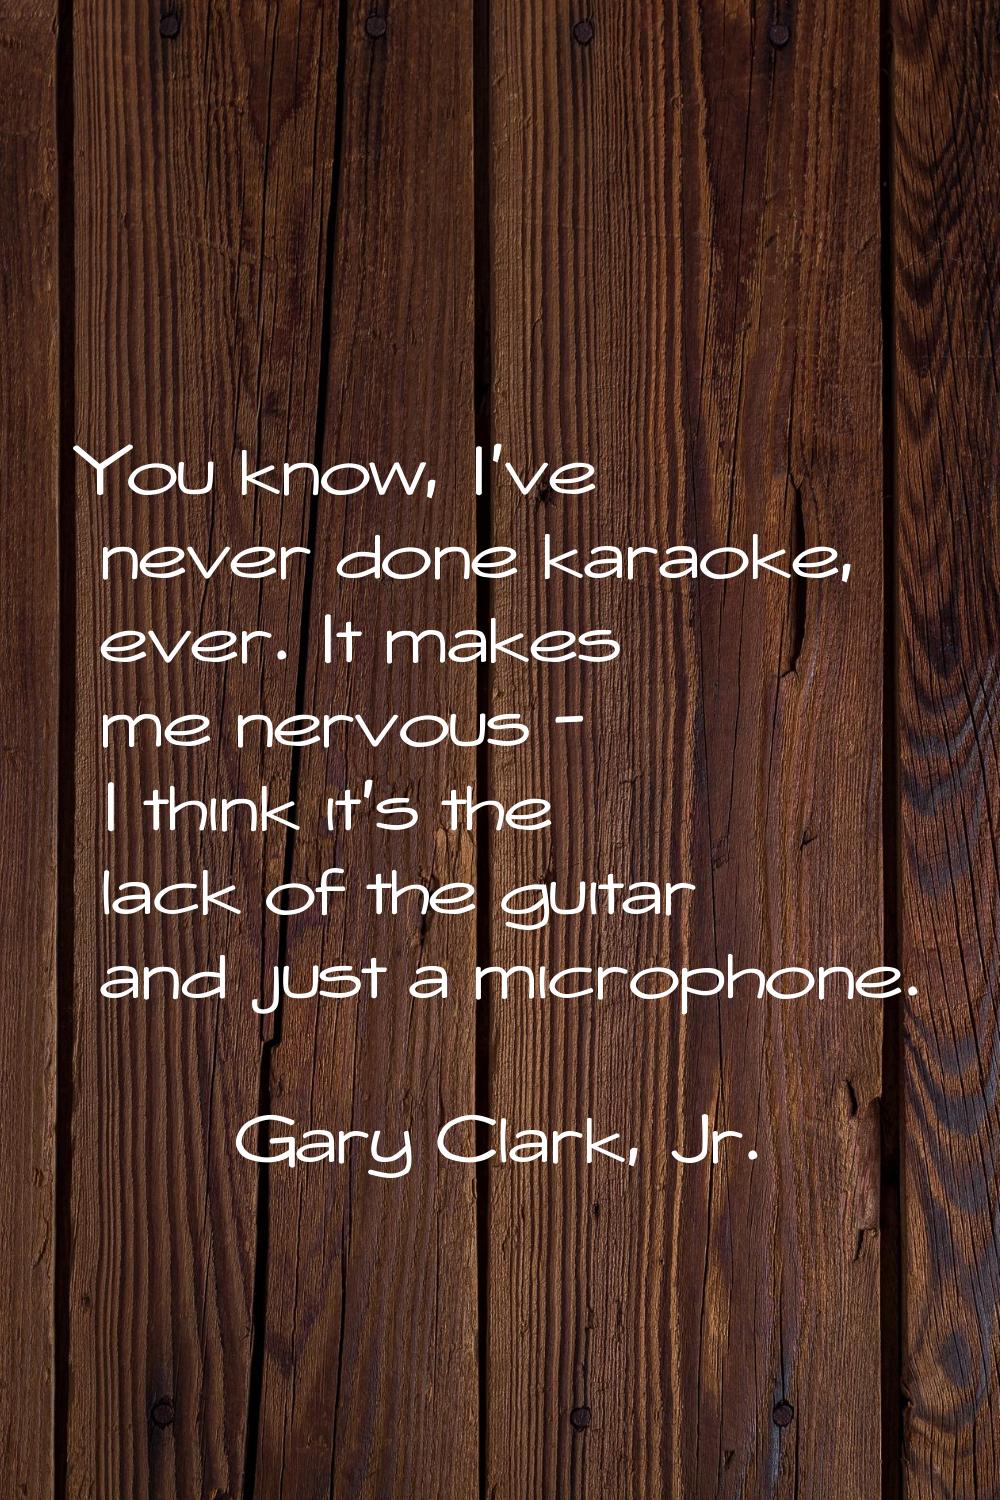 You know, I've never done karaoke, ever. It makes me nervous - I think it's the lack of the guitar 